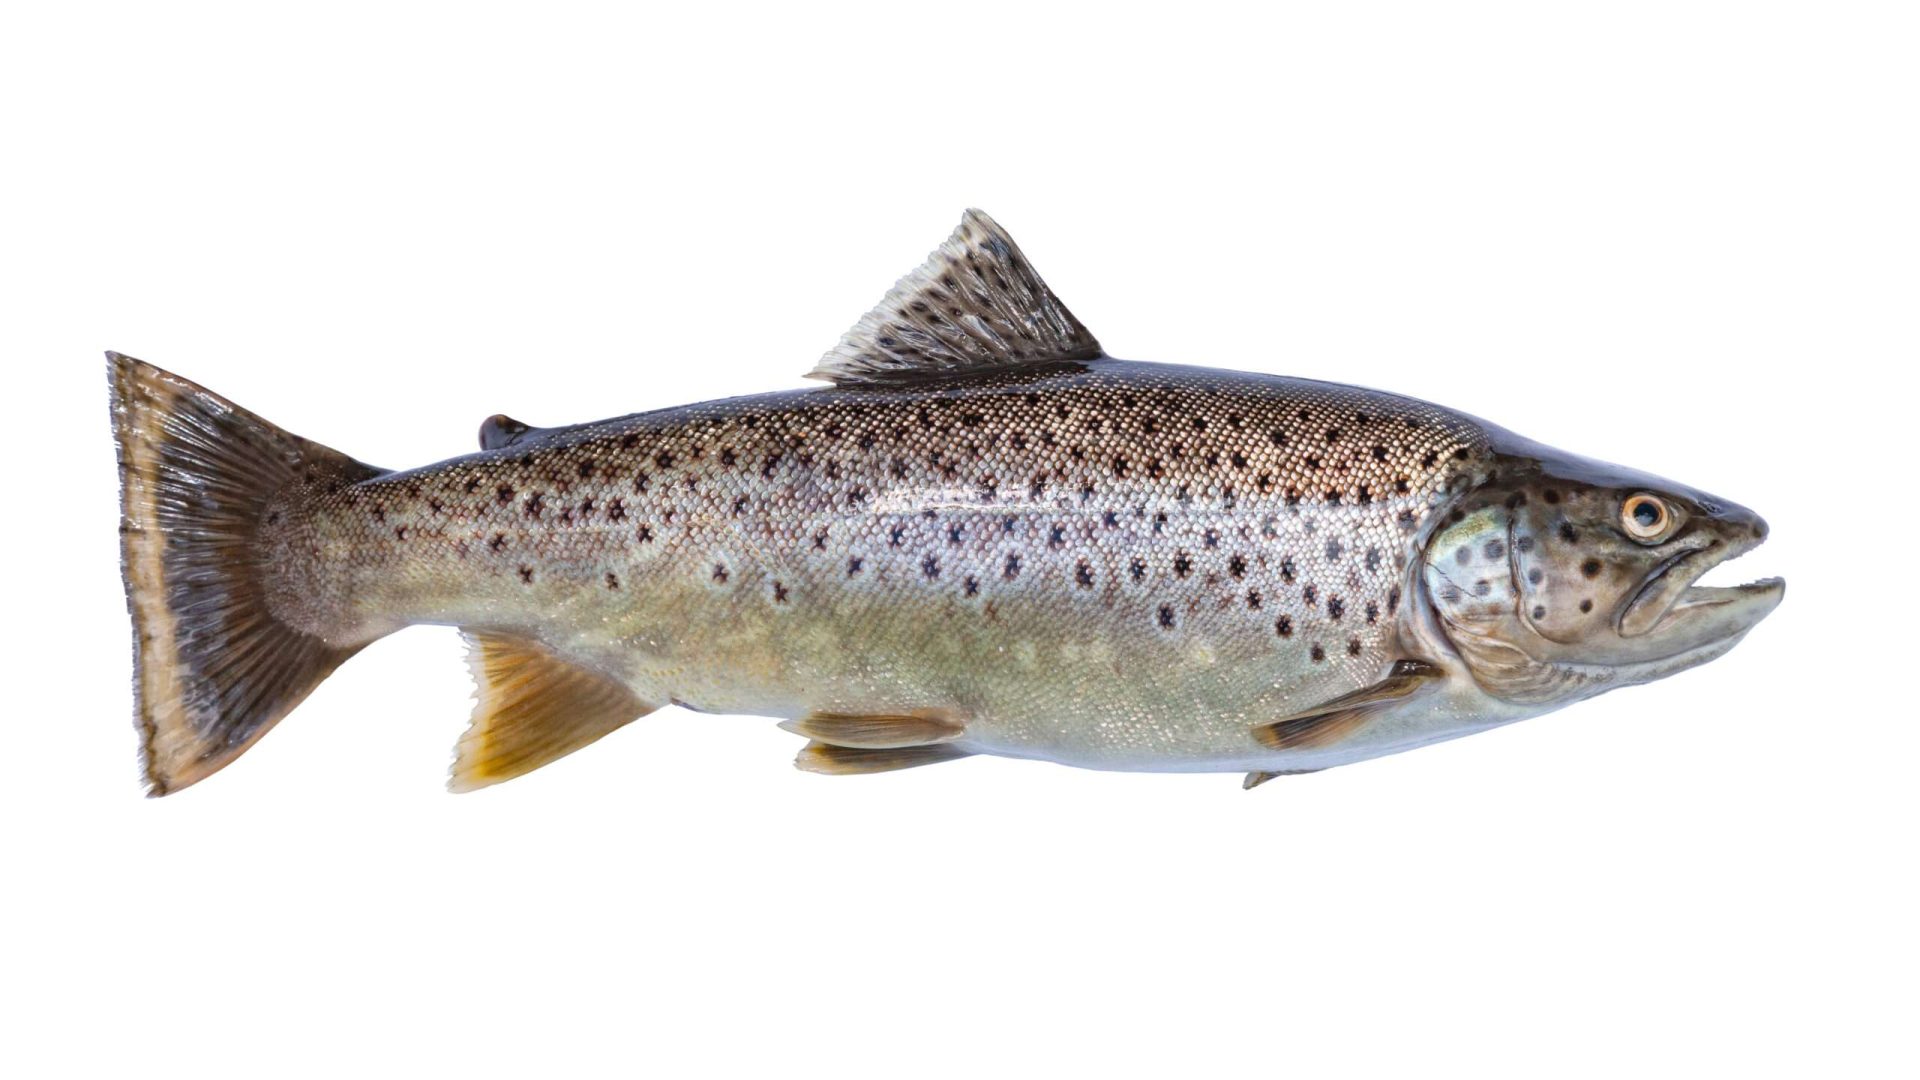 Close-up of a brown trout fish